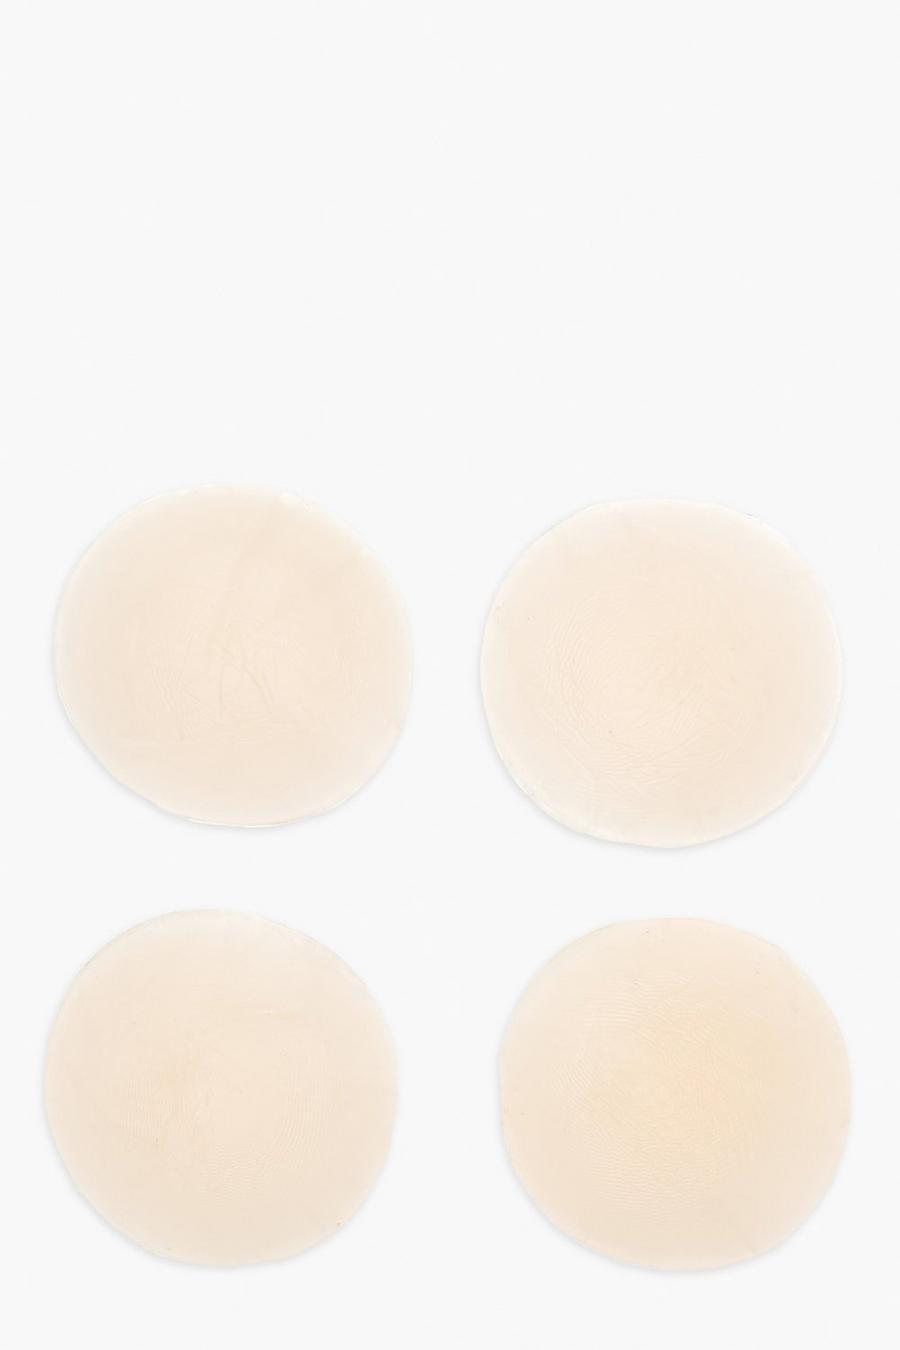 Boohoo Beauty - Copricapezzoli in silicone - set di 2, Natural image number 1